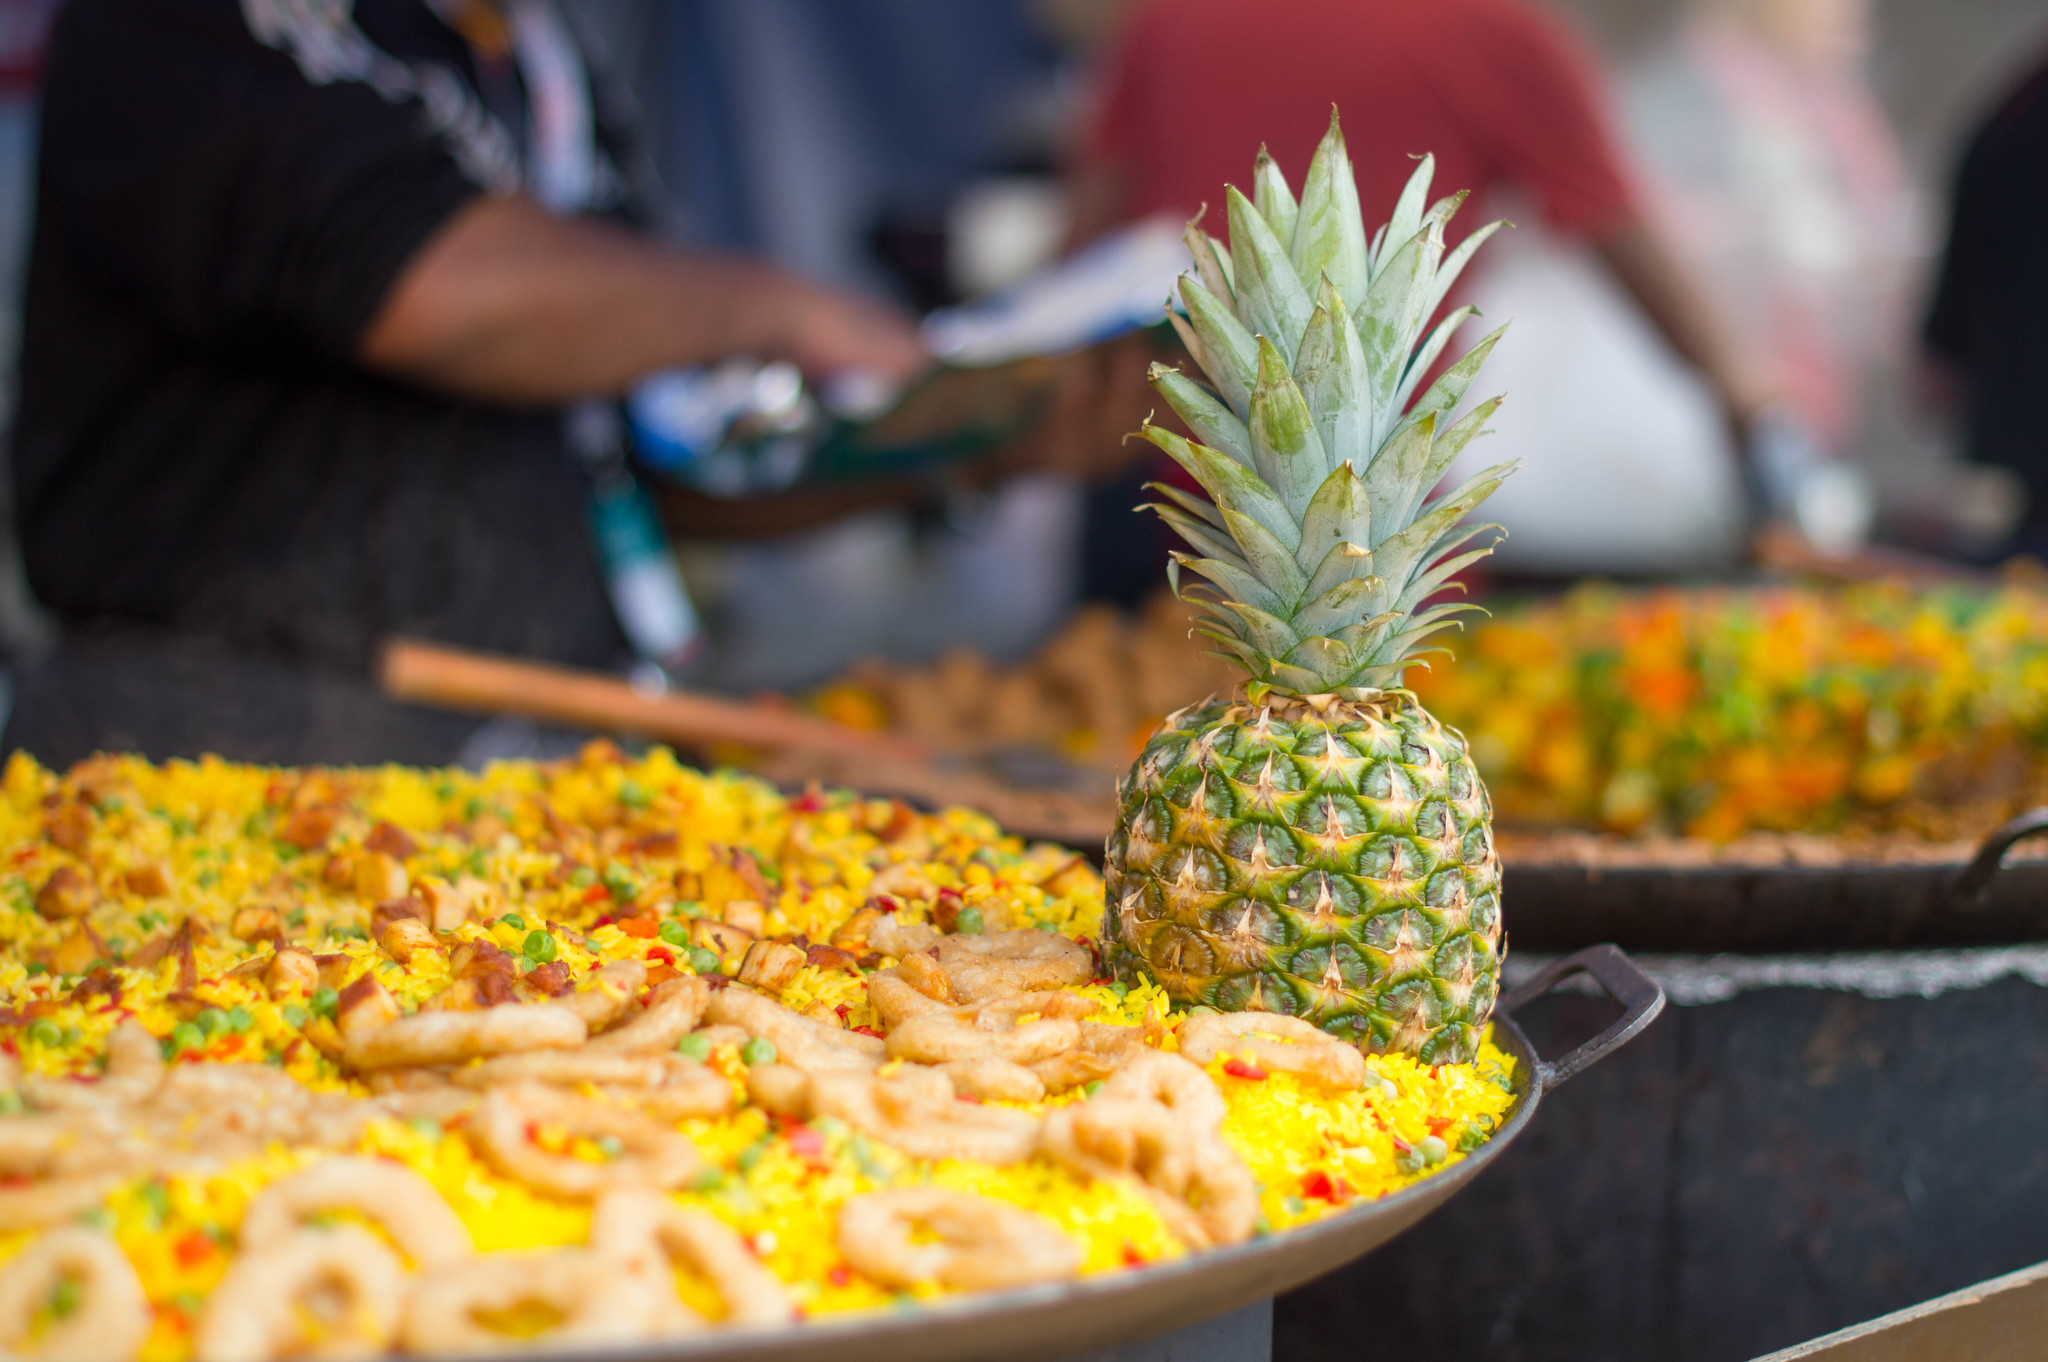 In the picture: food and a pineapple.